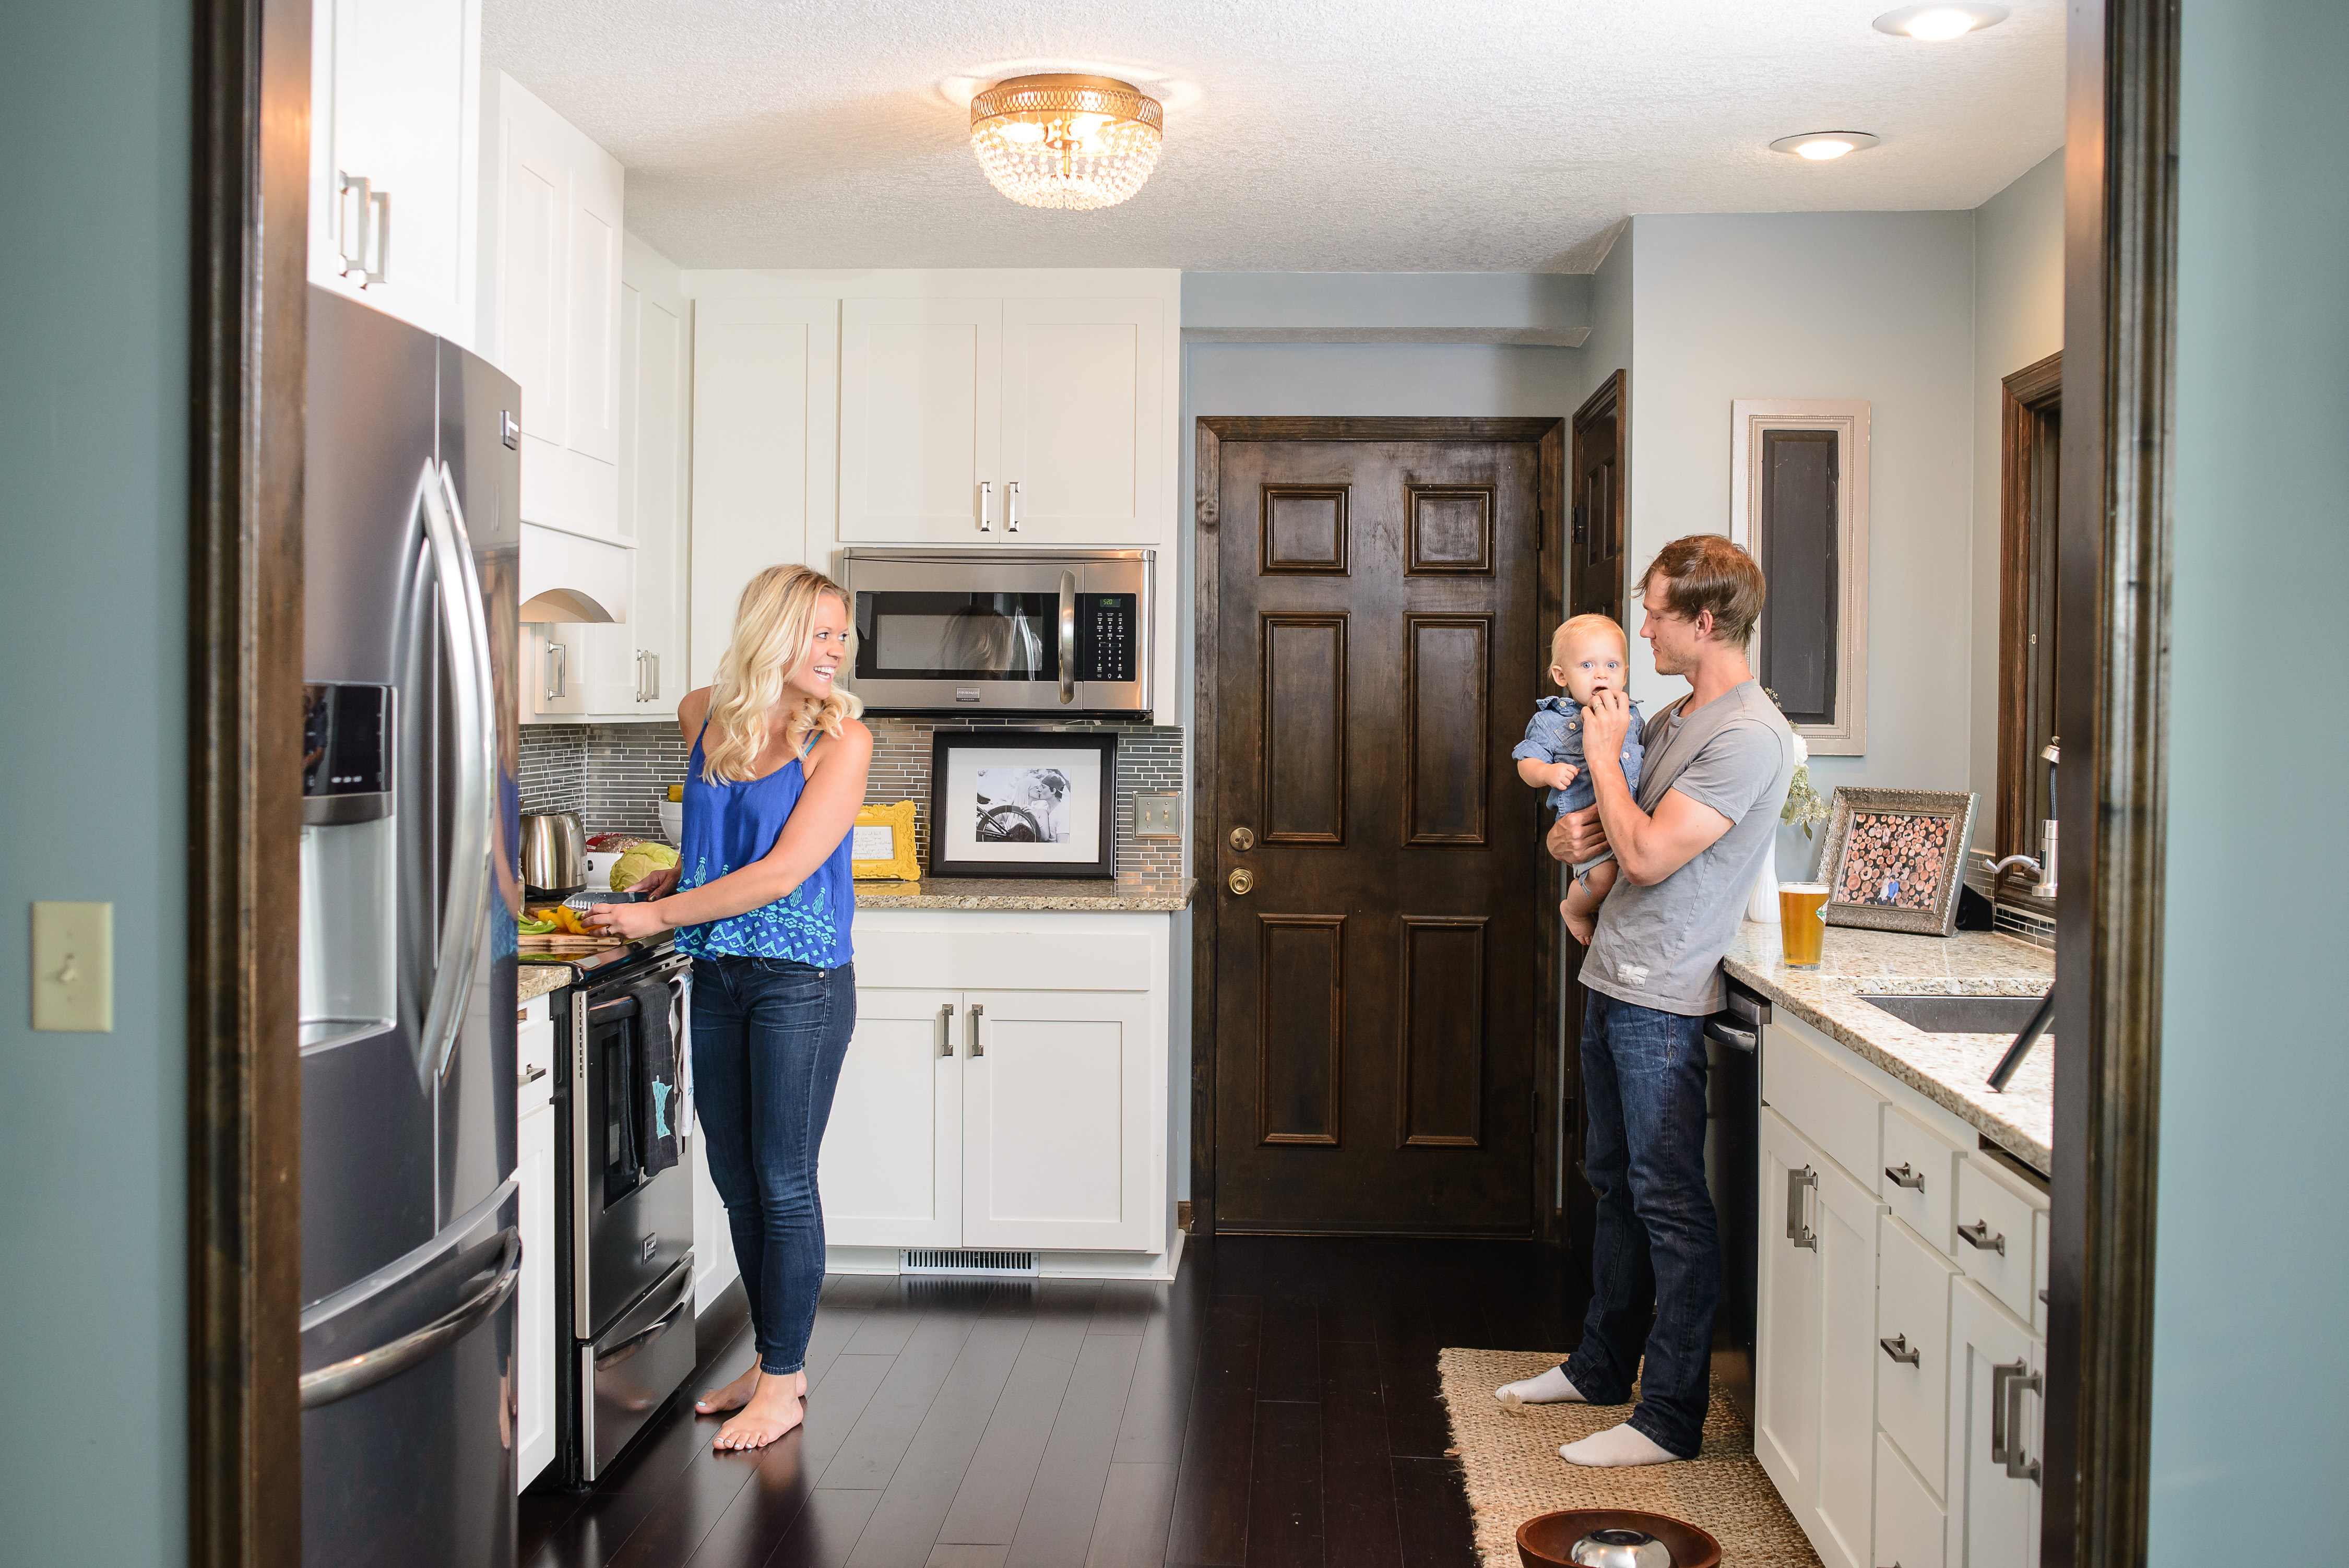 Lifestyle Family Photo-shoot in Kitchen | construction2style